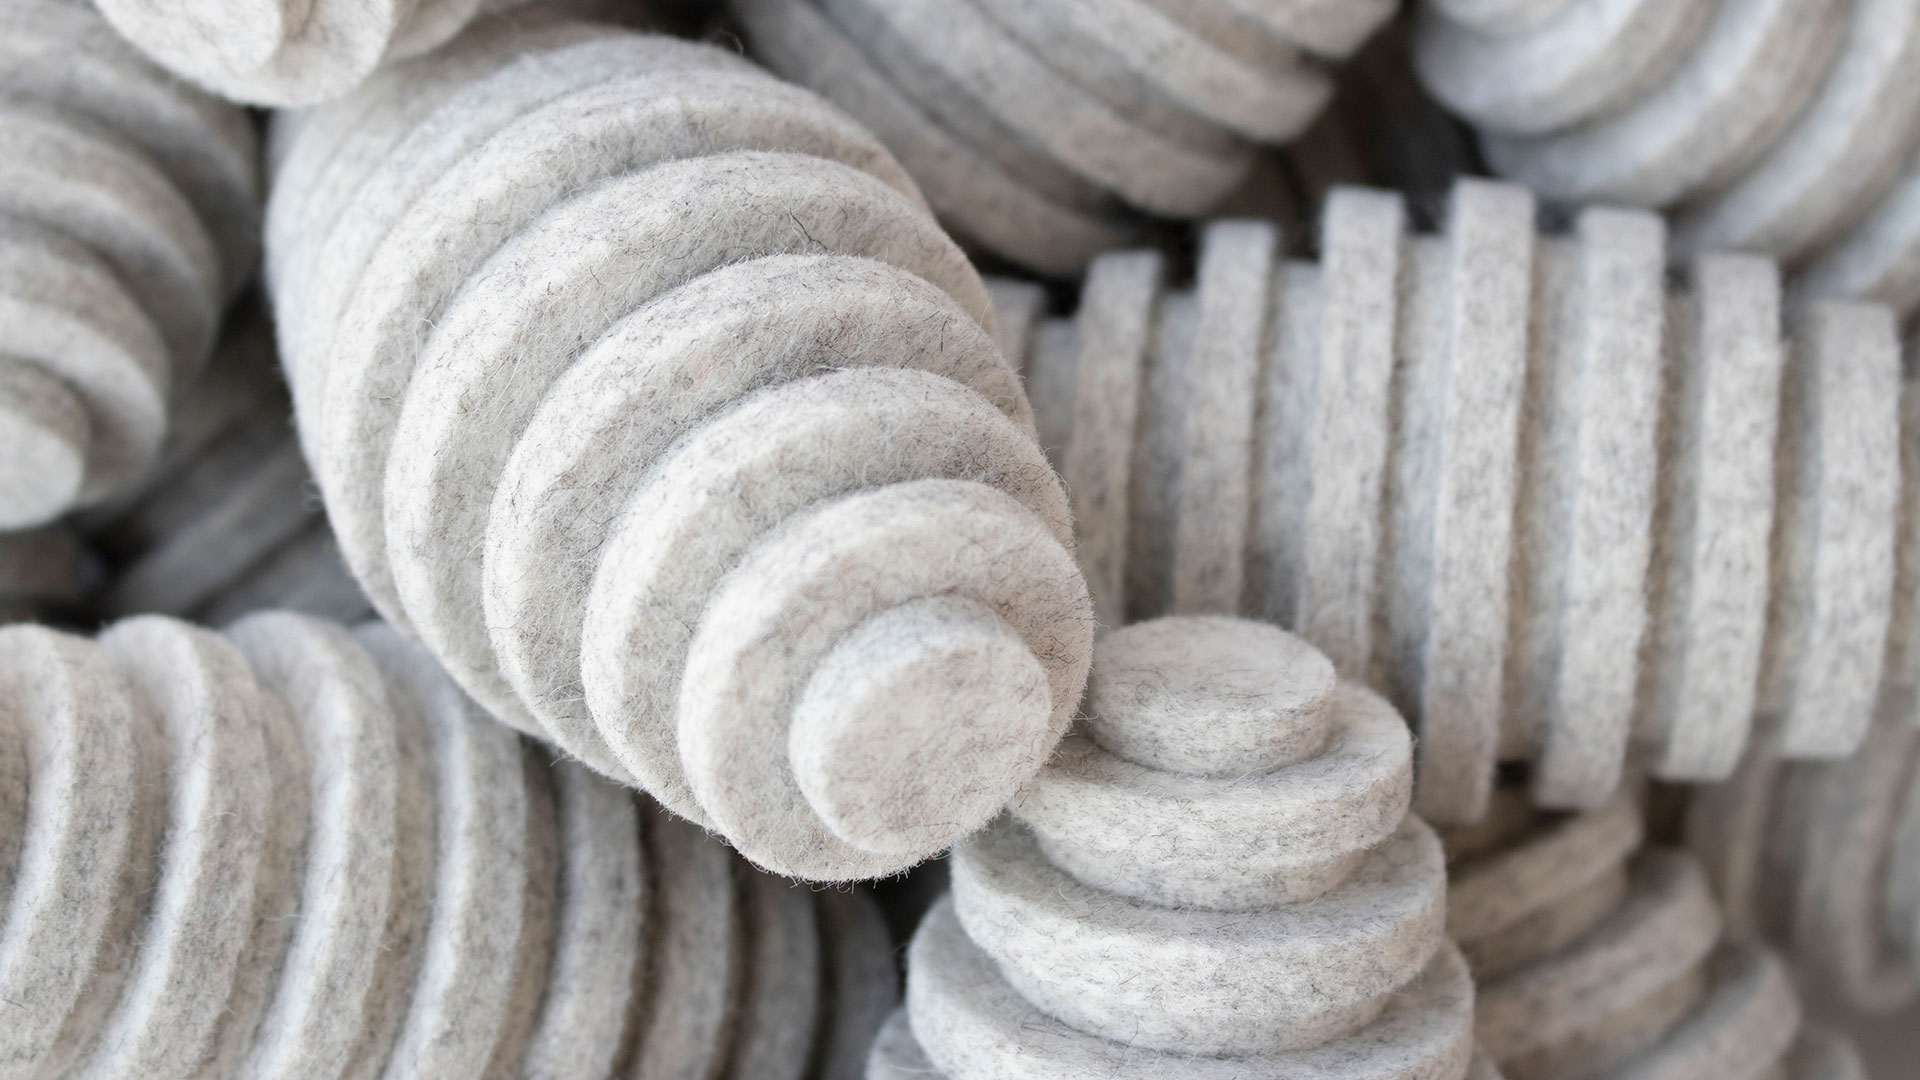 Closeup of pile of heathered white felt pods. They are oblong egg-shaped and have ridges.